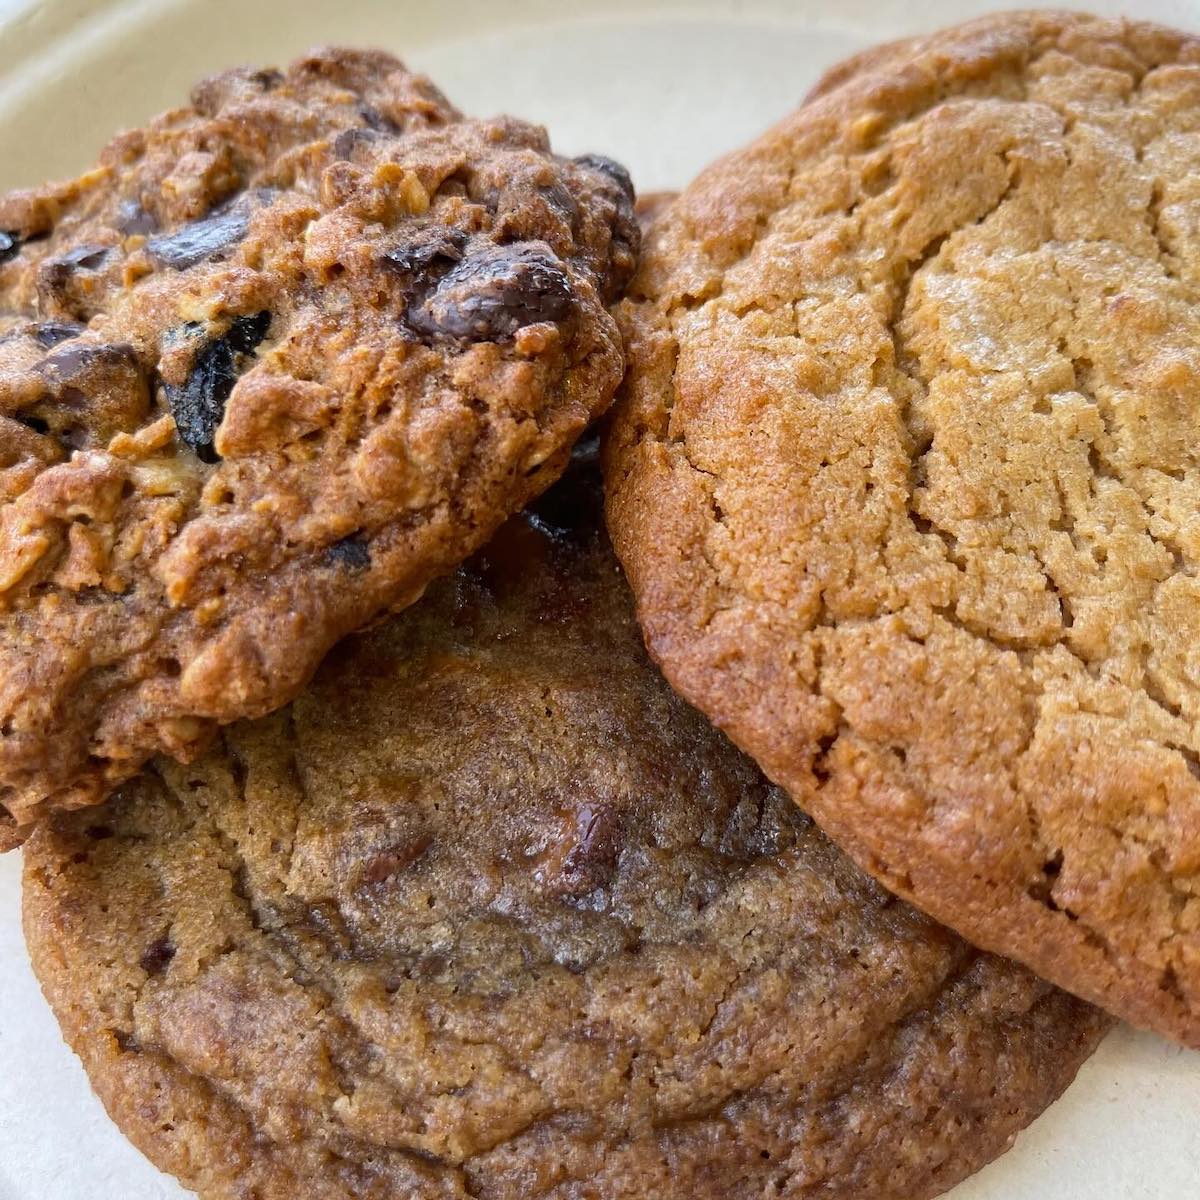 Cookies from Joanna's Marketplace in South Miami, Florida